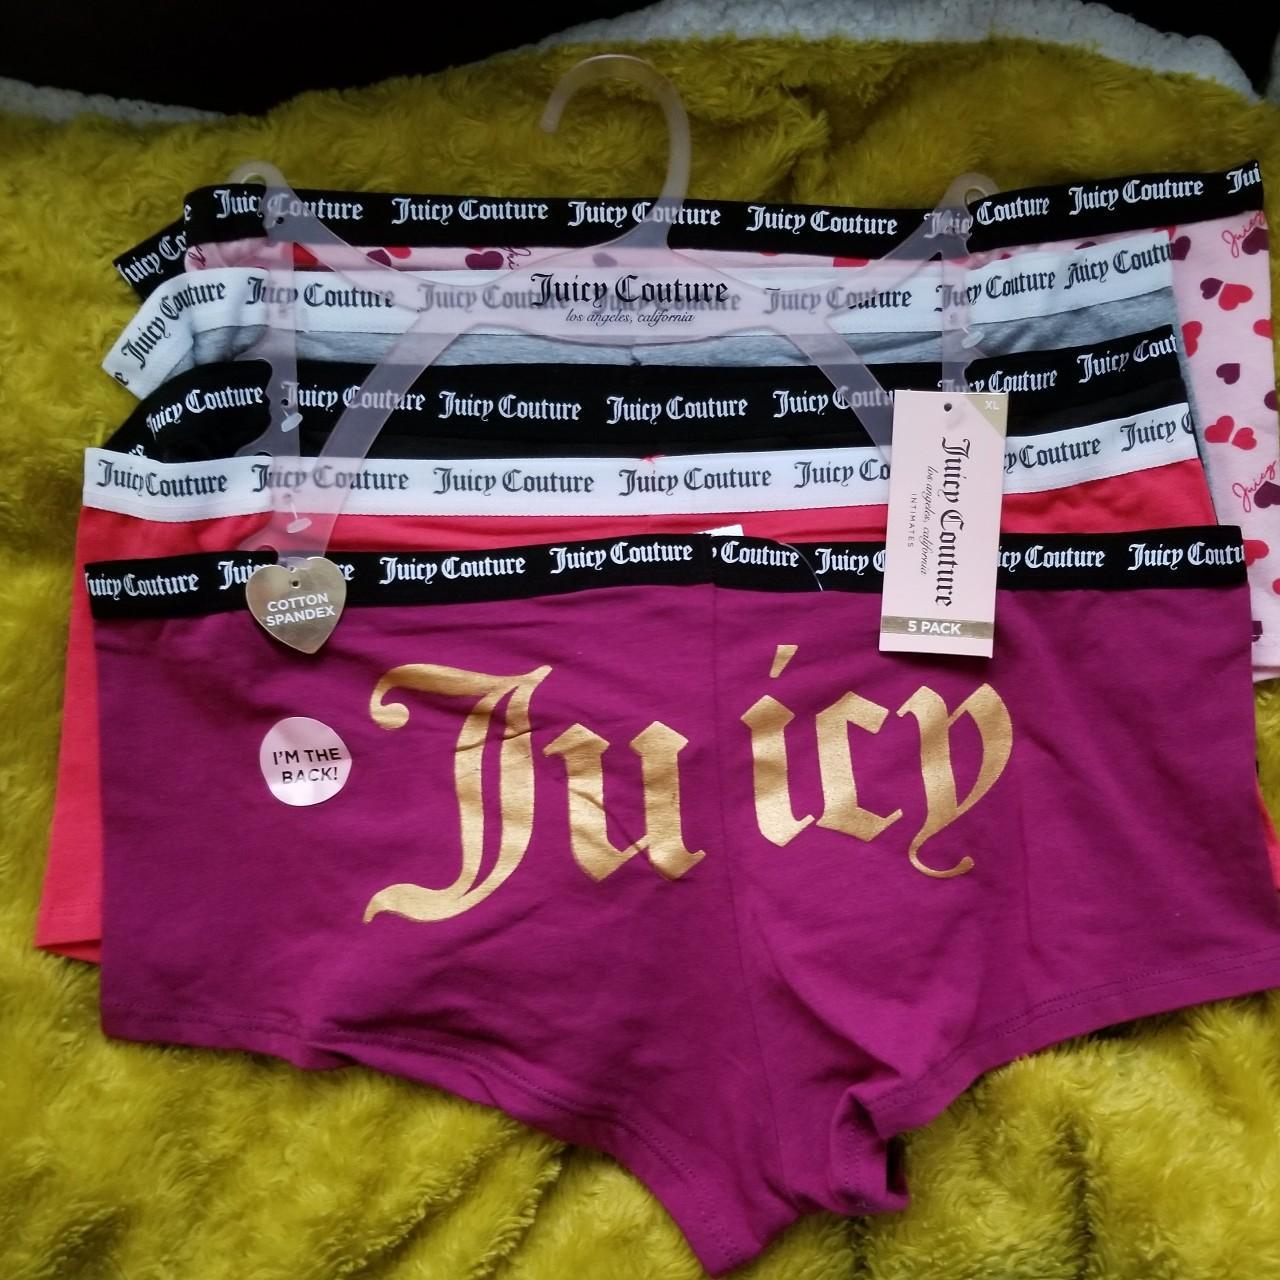 Juicy Couture boy shorts 5 pk NWT, Brand new with